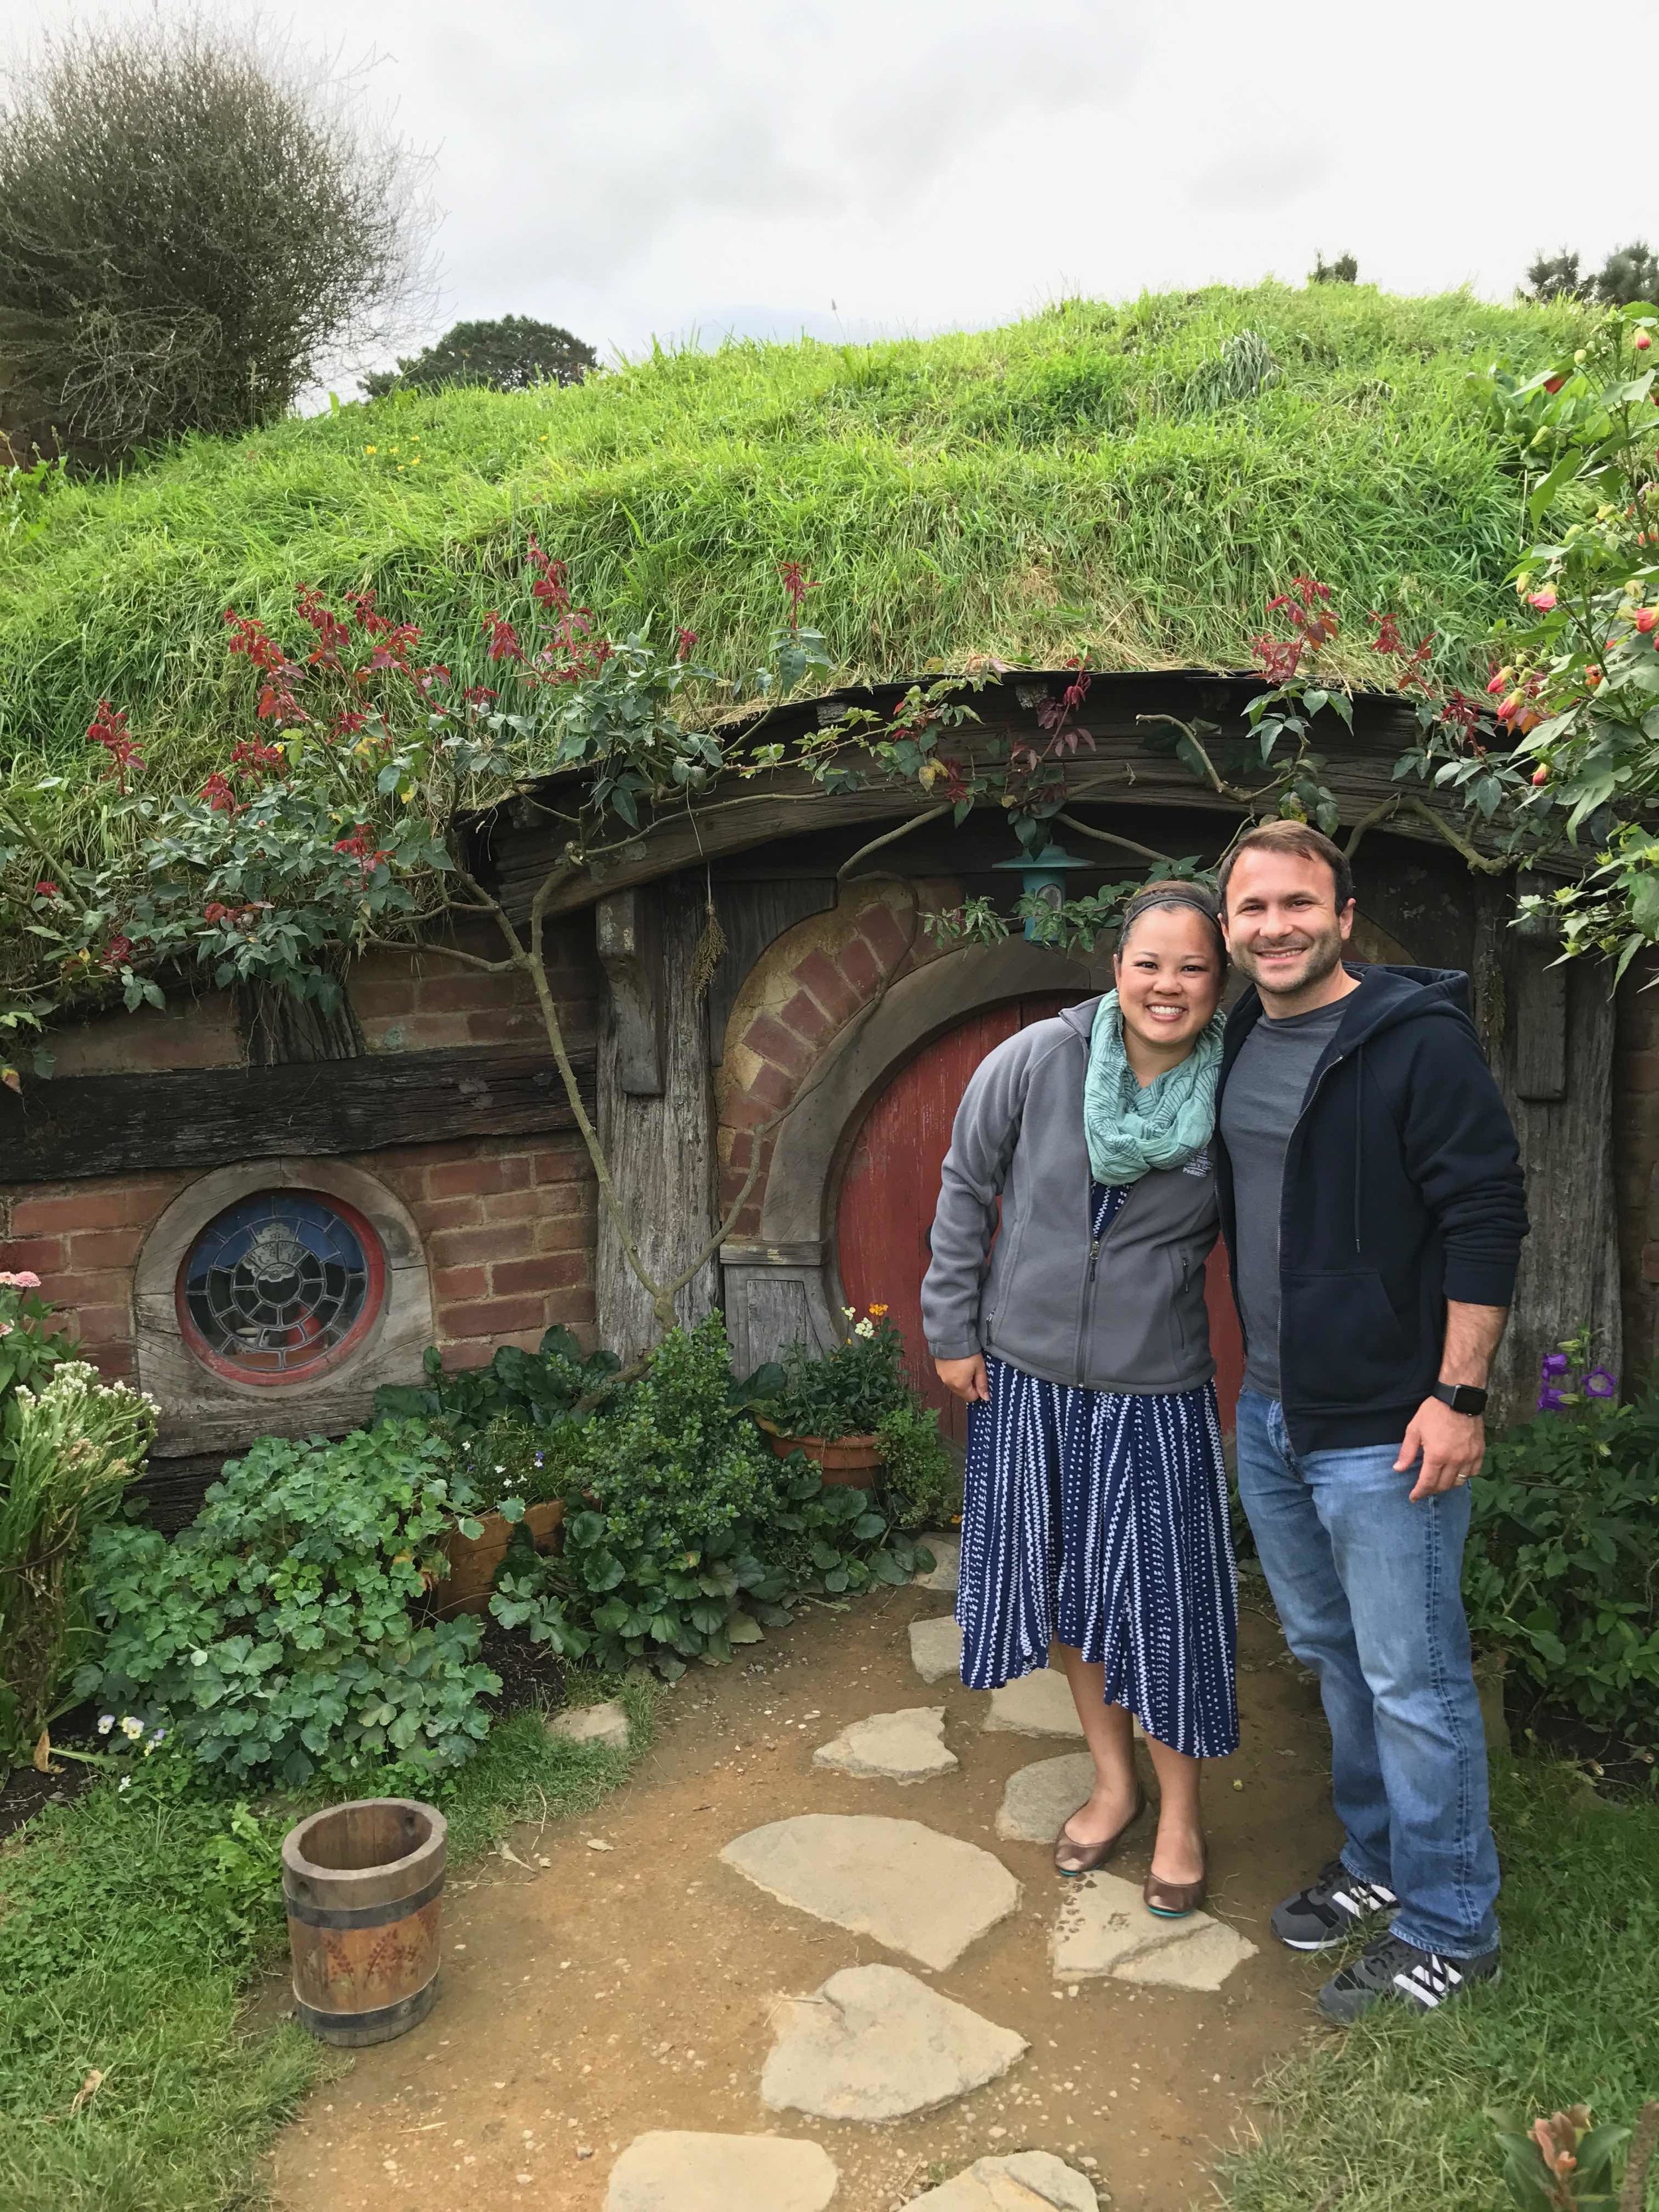 Visiting the Shire!